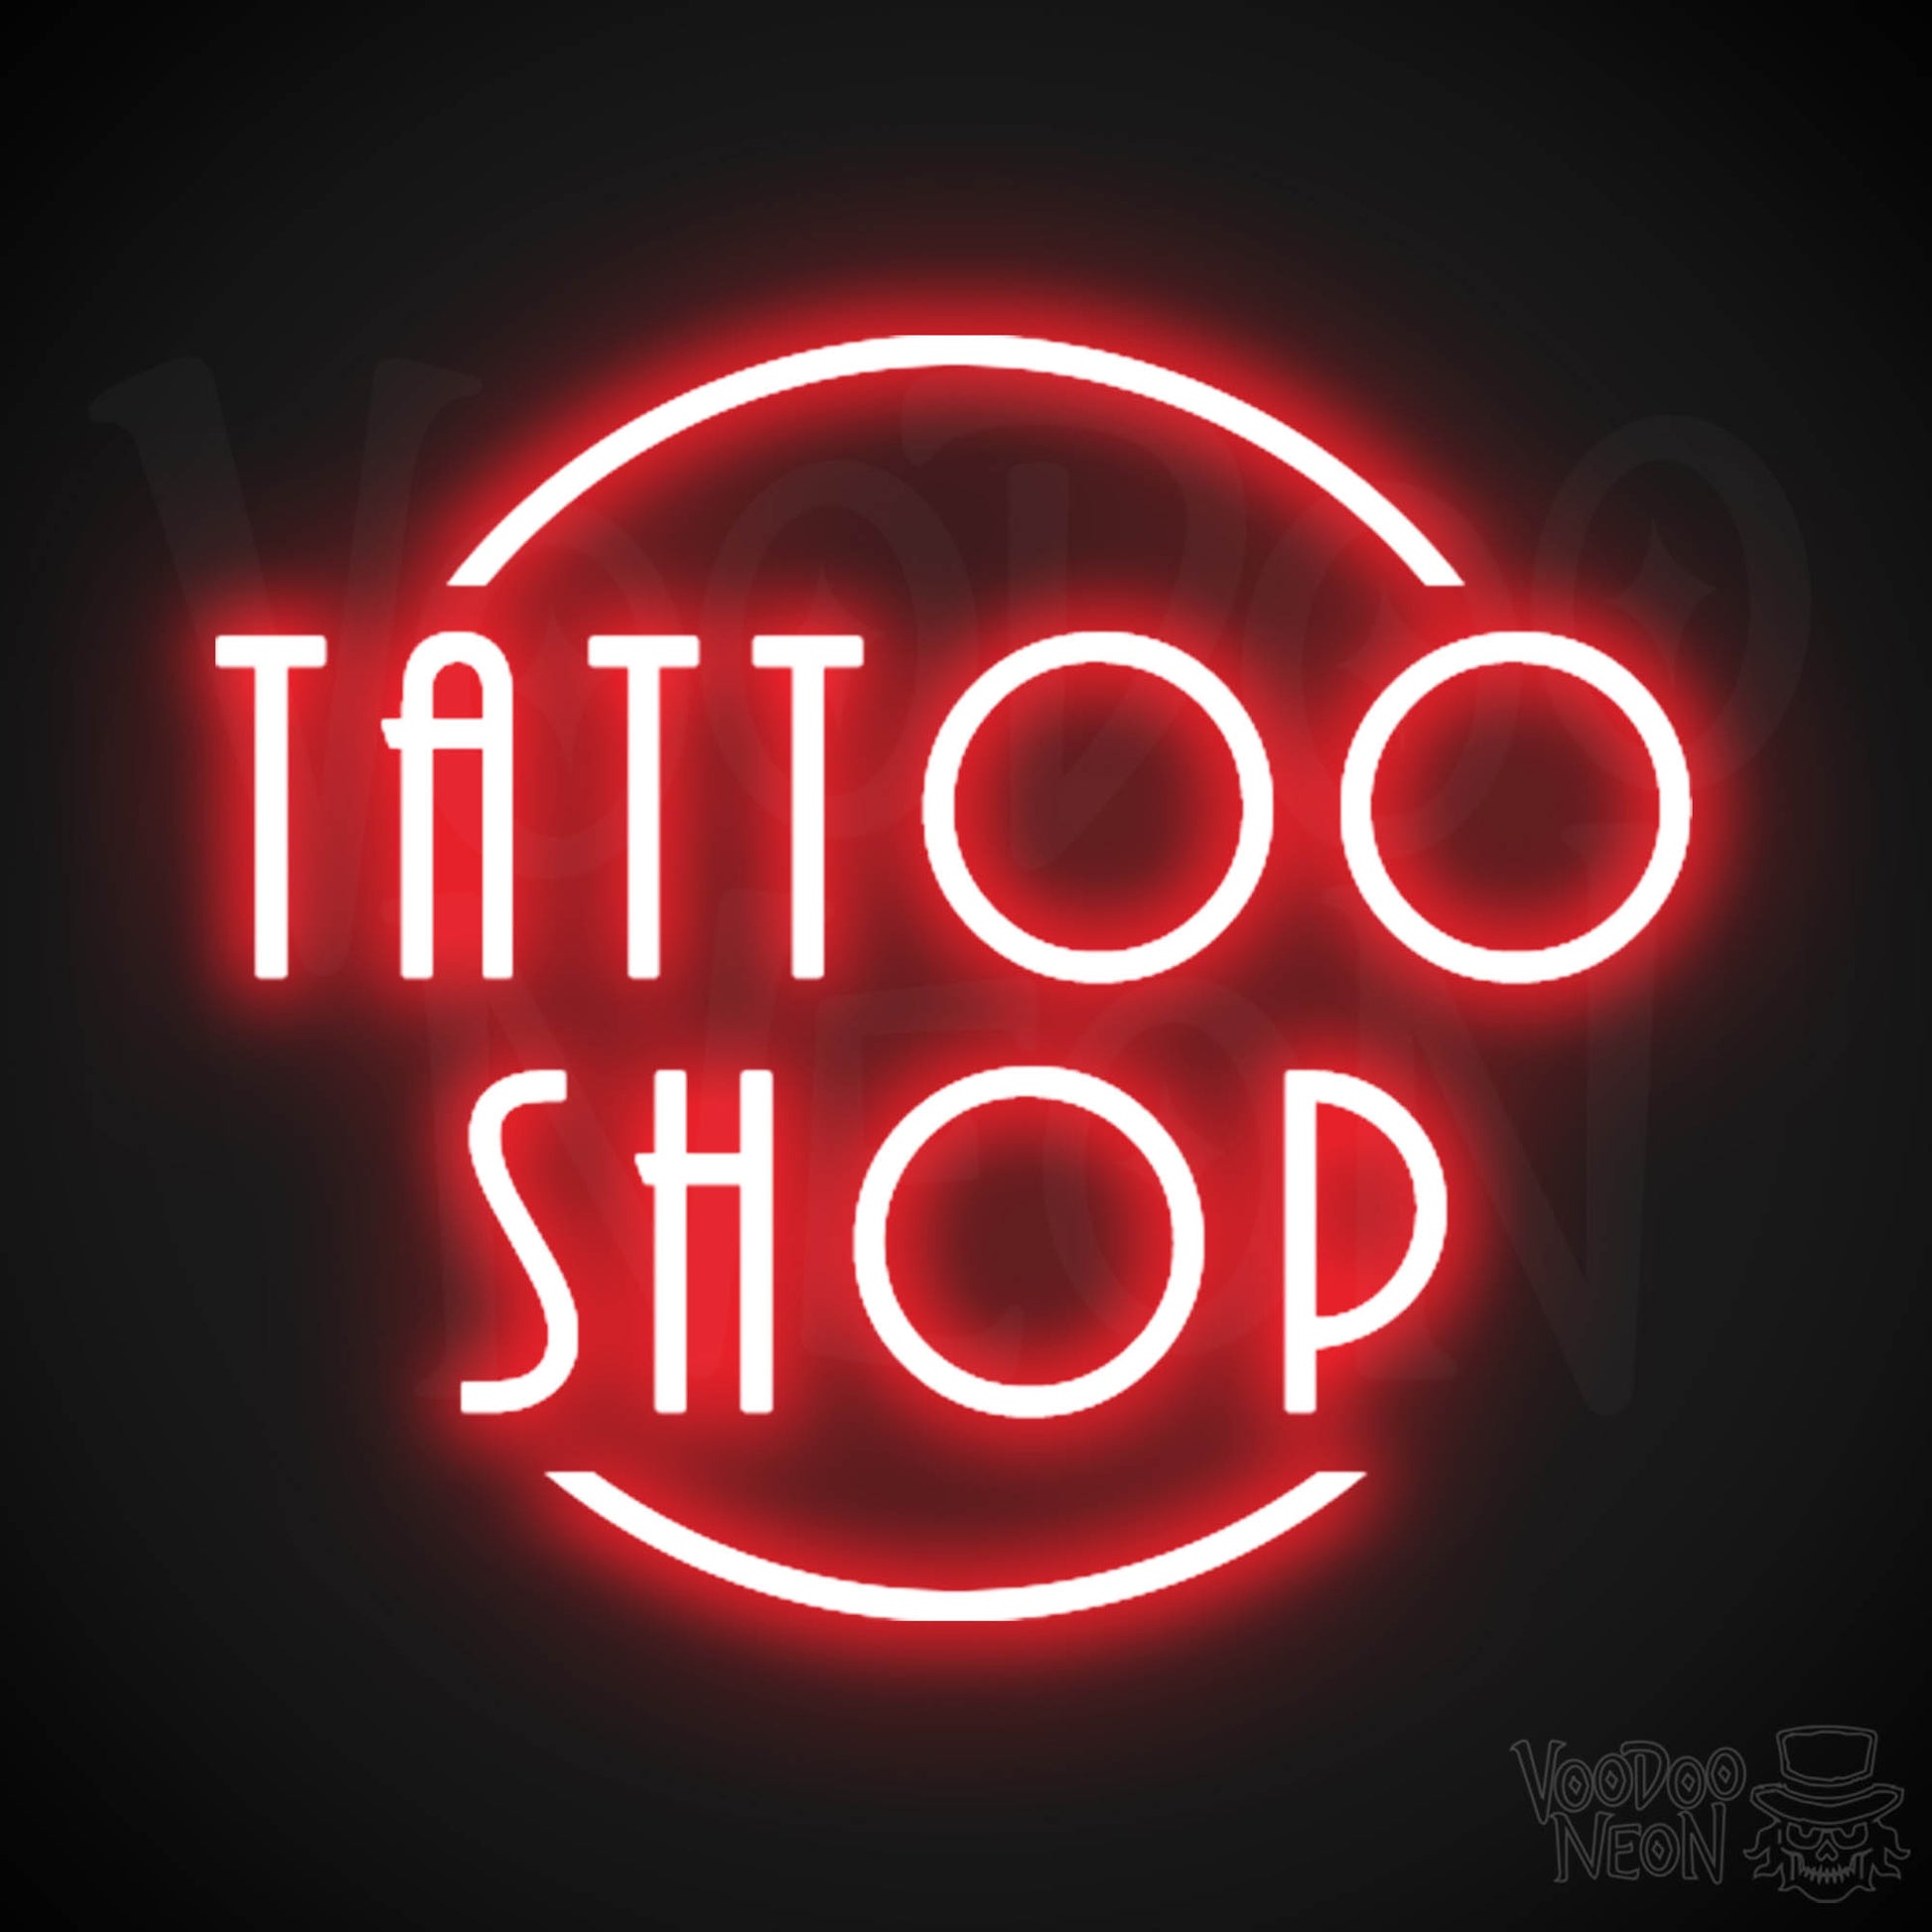 Tattoo Shop Neon Sign - Neon Tattoo Shop Sign - Tattoo Sign - Color Red